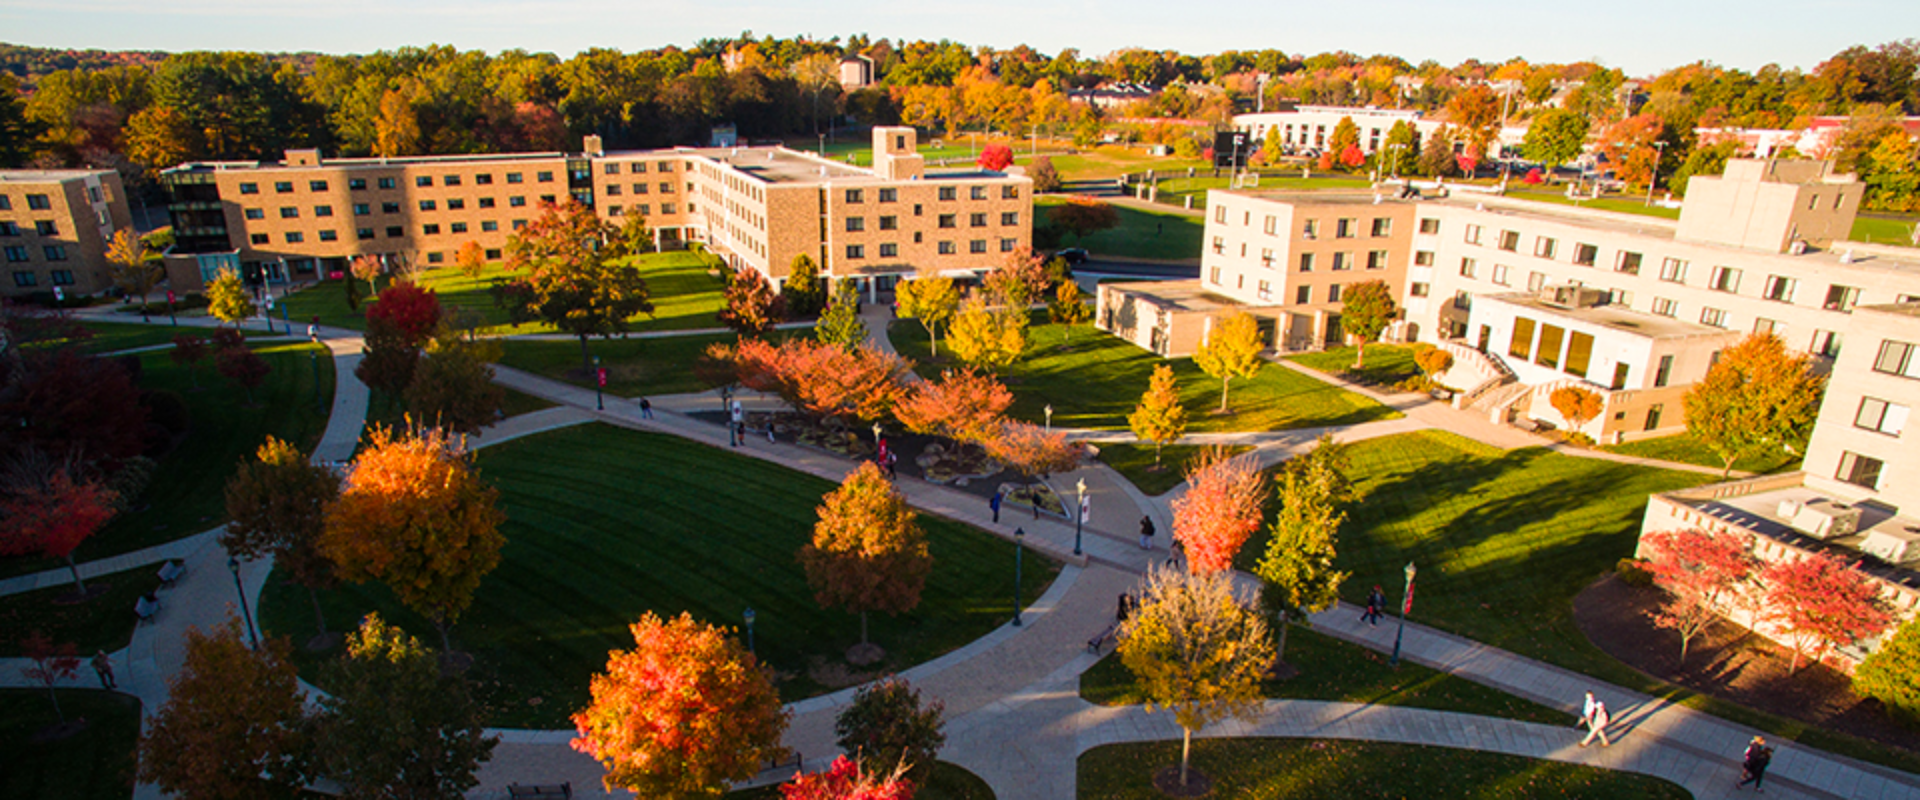 Fairfield University Admits 33% Of Students To The Class of 2028